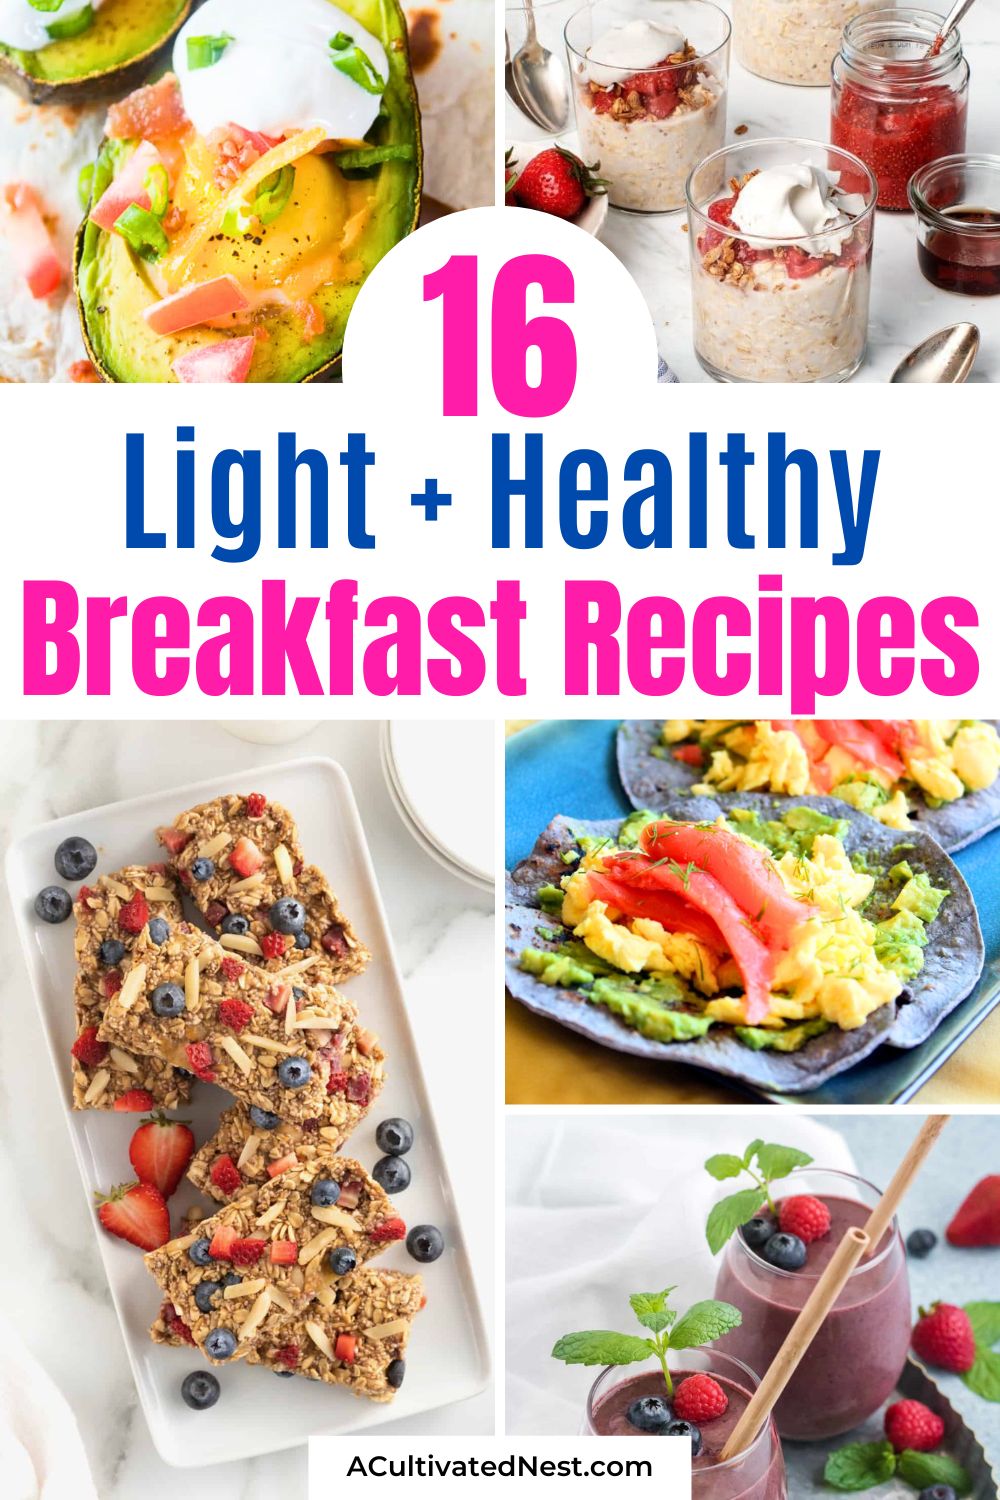 16 Light and Healthy Summer Breakfast Recipes- Kickstart your day with these light and healthy summer breakfast recipes! These nutritious and flavorful breakfast options include everything from savory tacos to sweet overnight oats. Ideal for hot summer days when you need a light yet filling meal! | #BreakfastDelights #SummerBreakfasts #BreakfastRecipes #LightMeals #ACultivatedNest